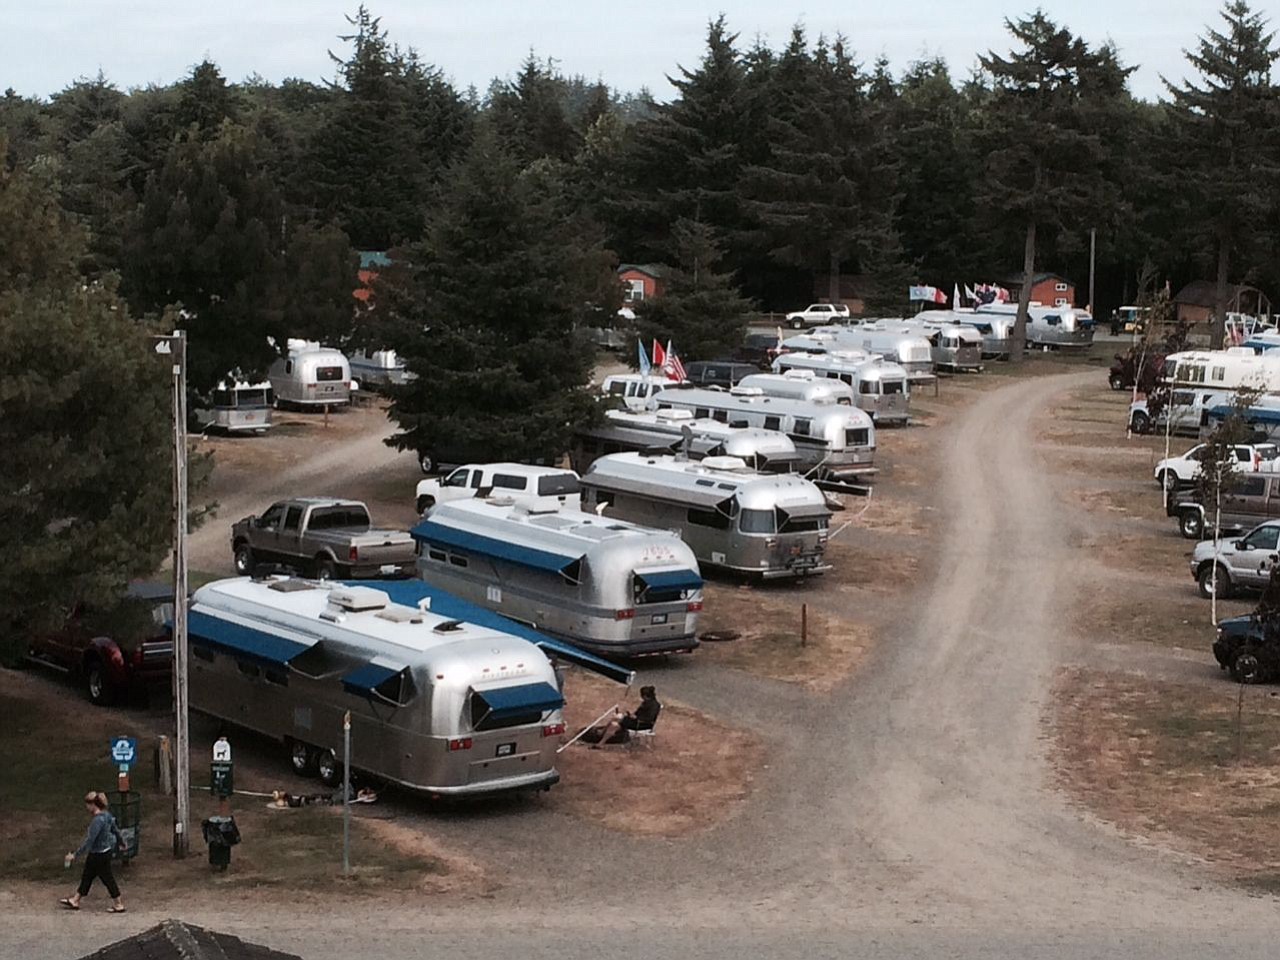 More than 80 Airstreams were in Astoria on July 17 to 21 for a rally with the Oregon Airstream Club.